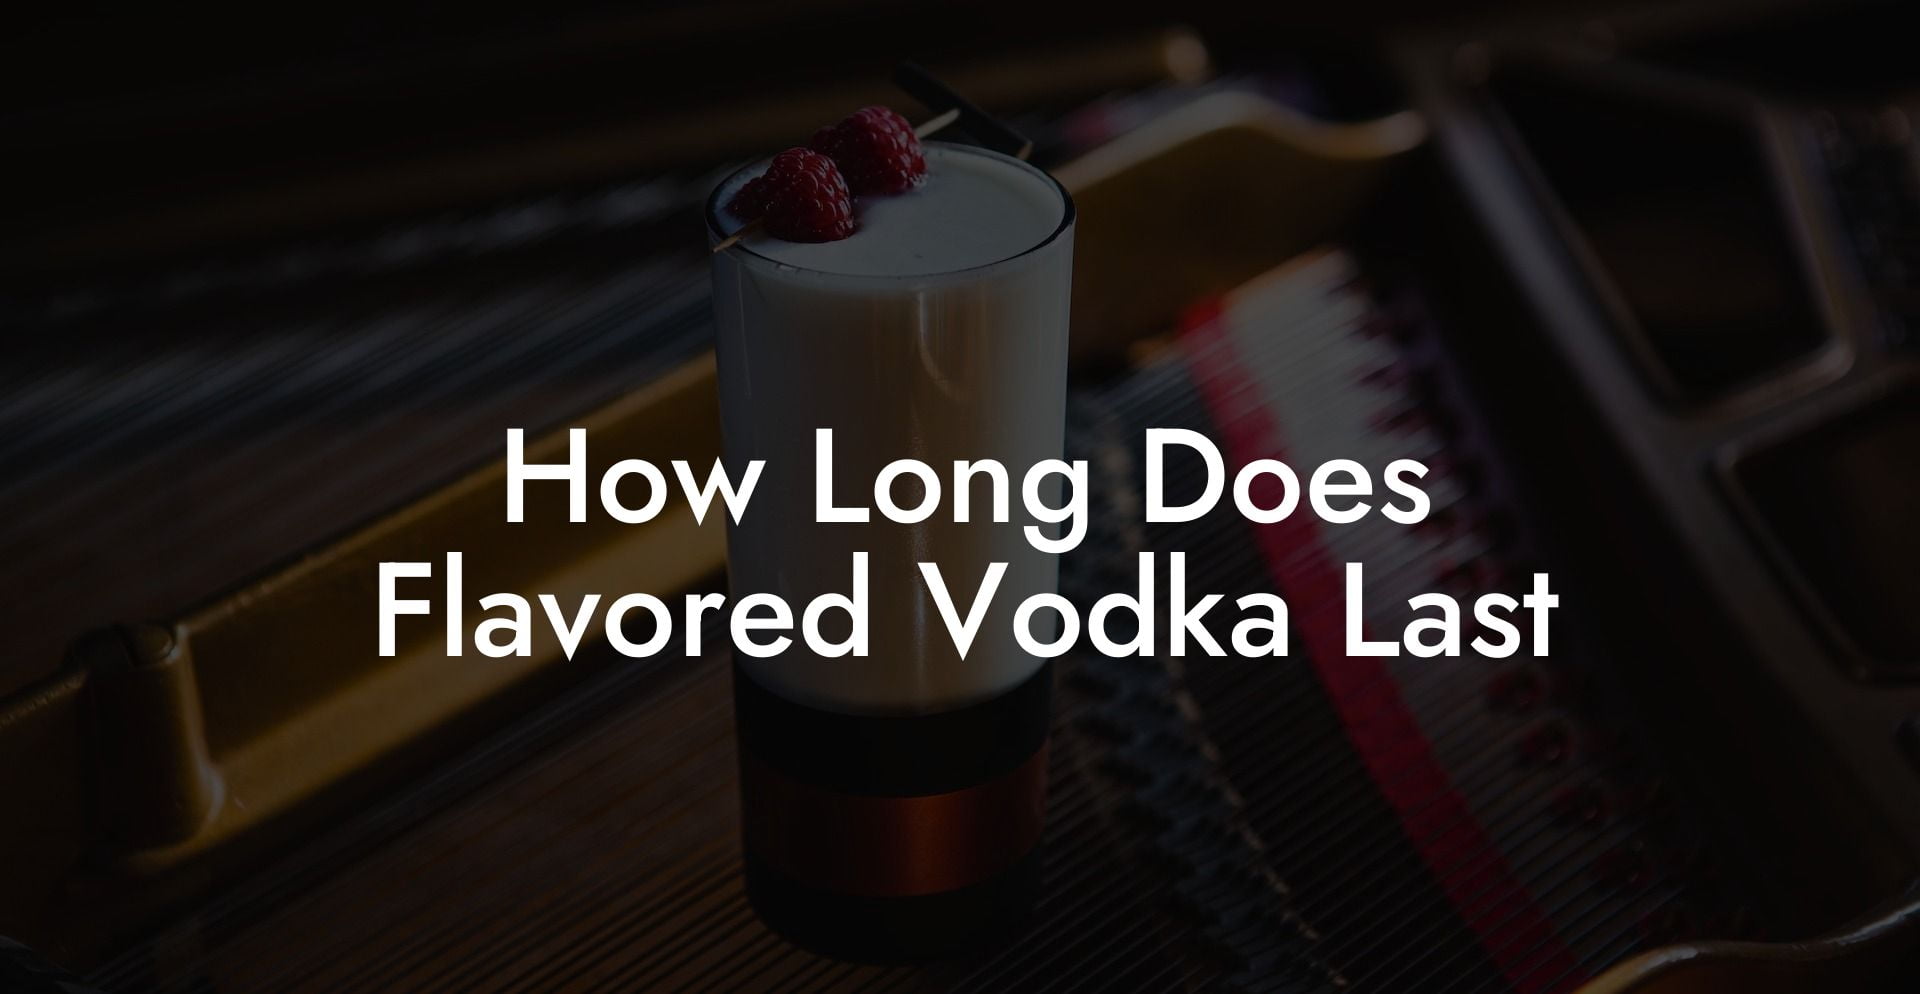 How Long Does Flavored Vodka Last